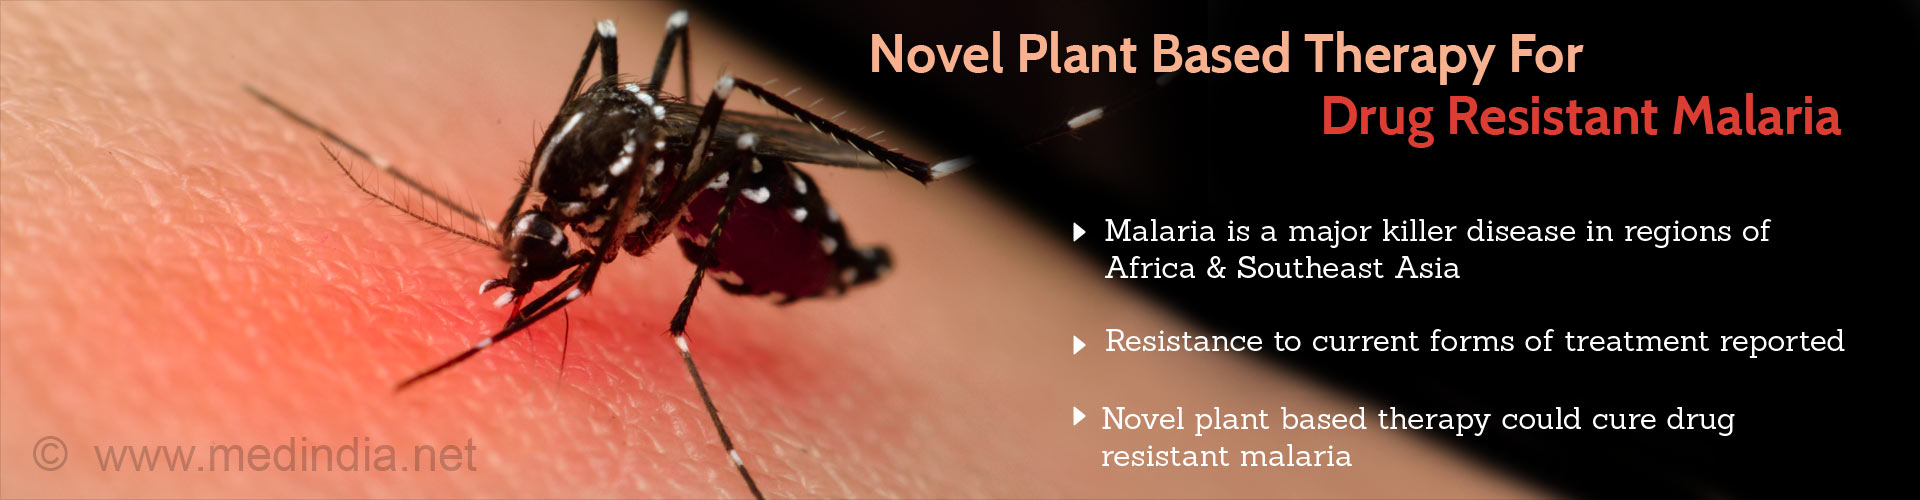 Novel plant based therapy for drug resistant malaria
- Malaria is a major killer disease in regions of Africa and Southeast Asia
- Resistance to current forms of treatment reportes
- Novel plant based therapy could cure drug resistant malaria